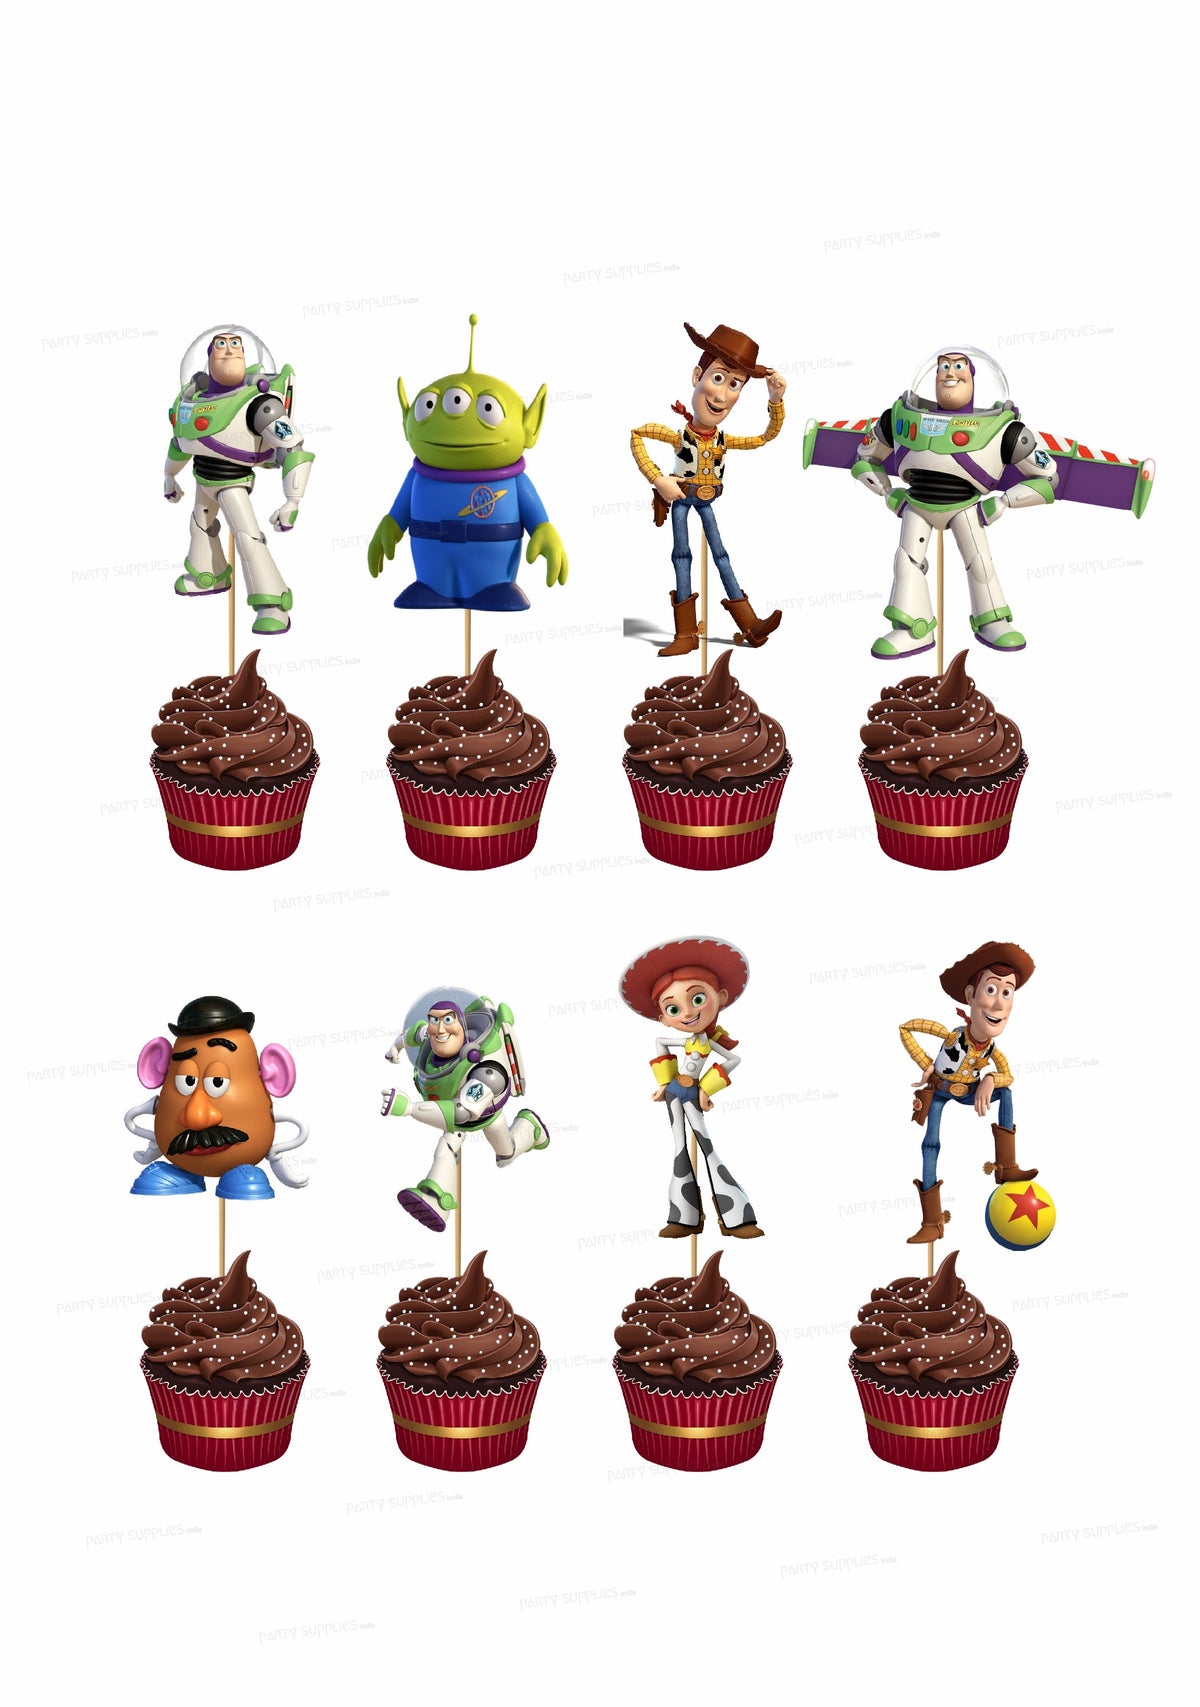 PSI Toy Story Theme Cup Cake Topper